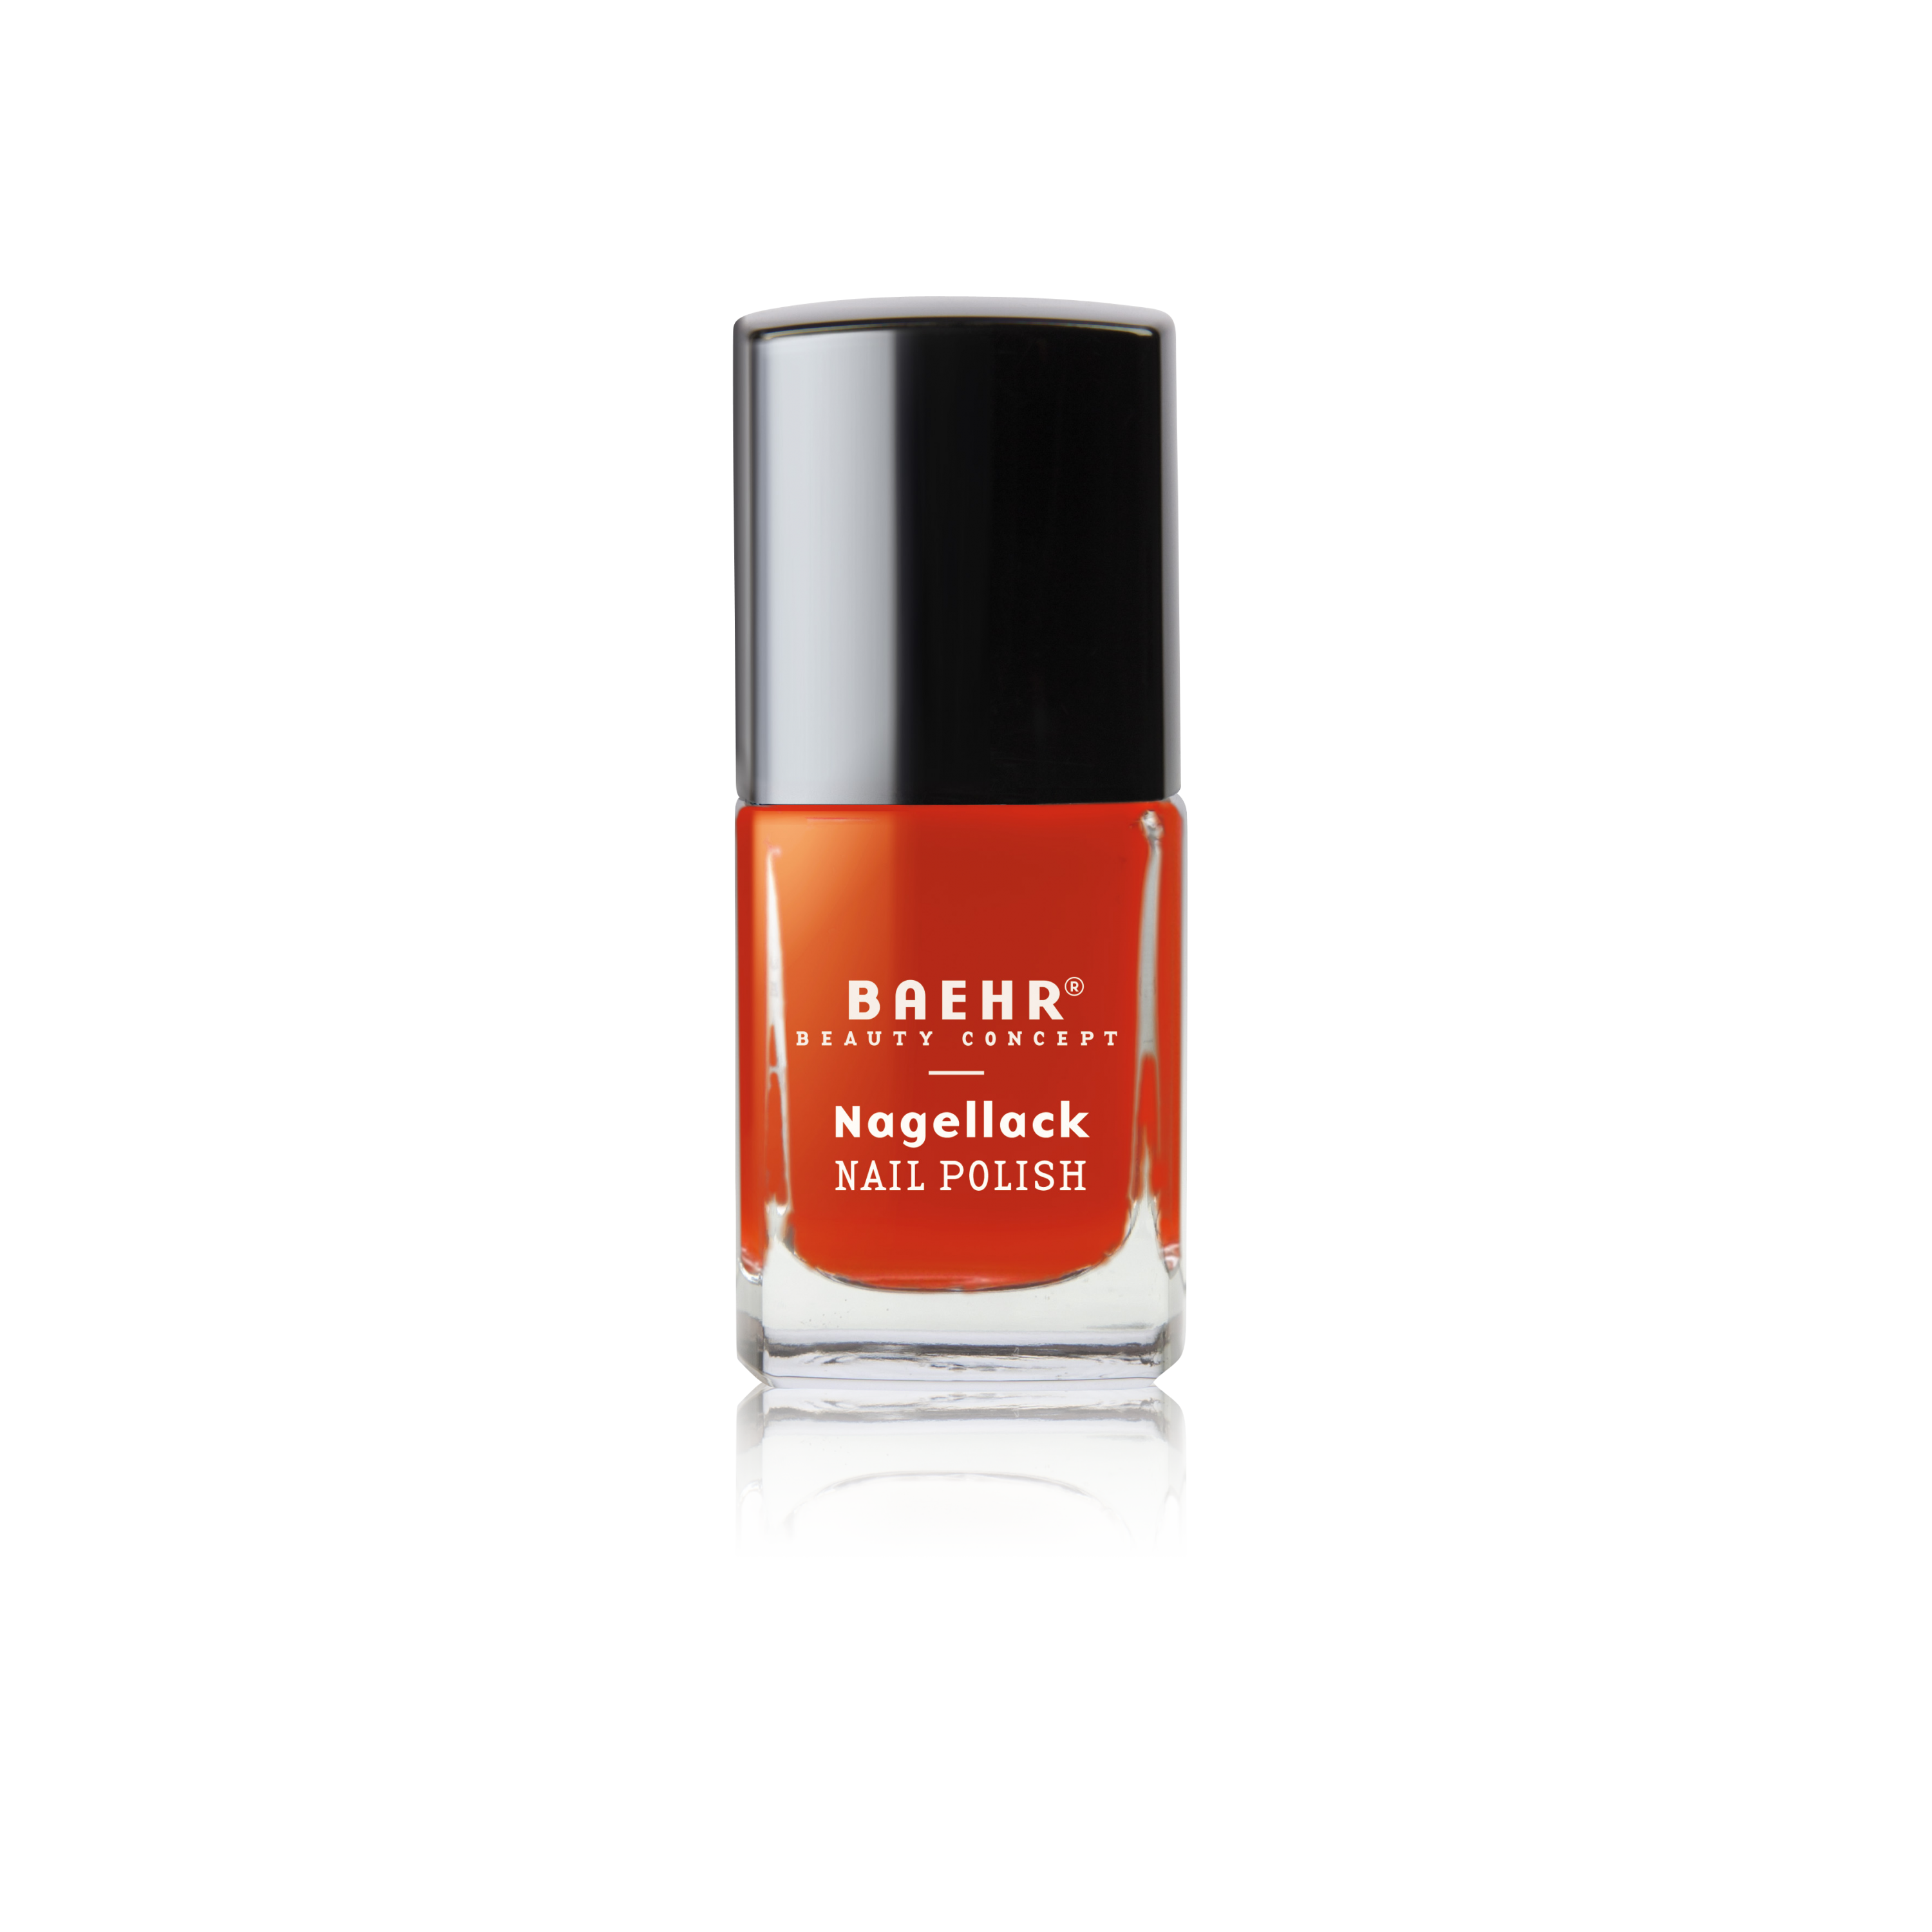 BAEHR BEAUTY CONCEPT - NAILS Nagellack elegance red 11 ml